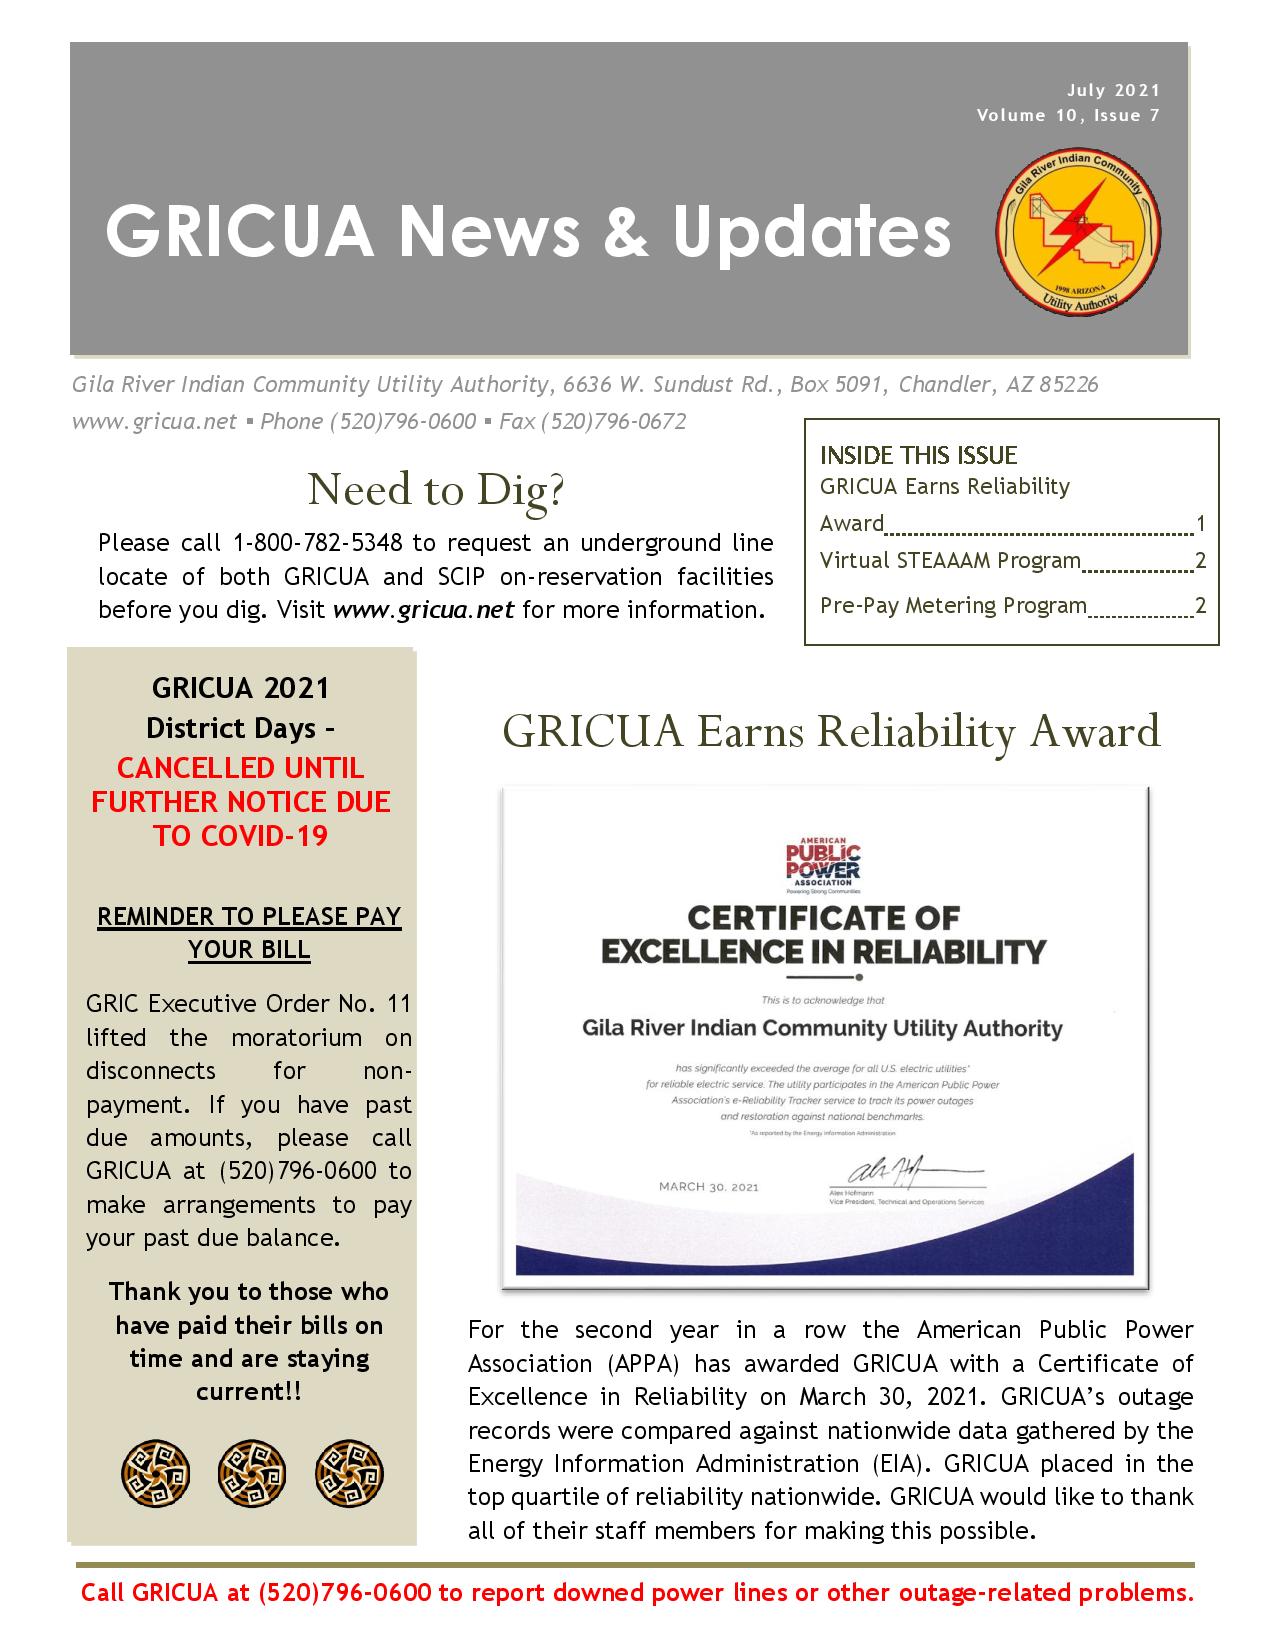 July 2021 newsletter page 1